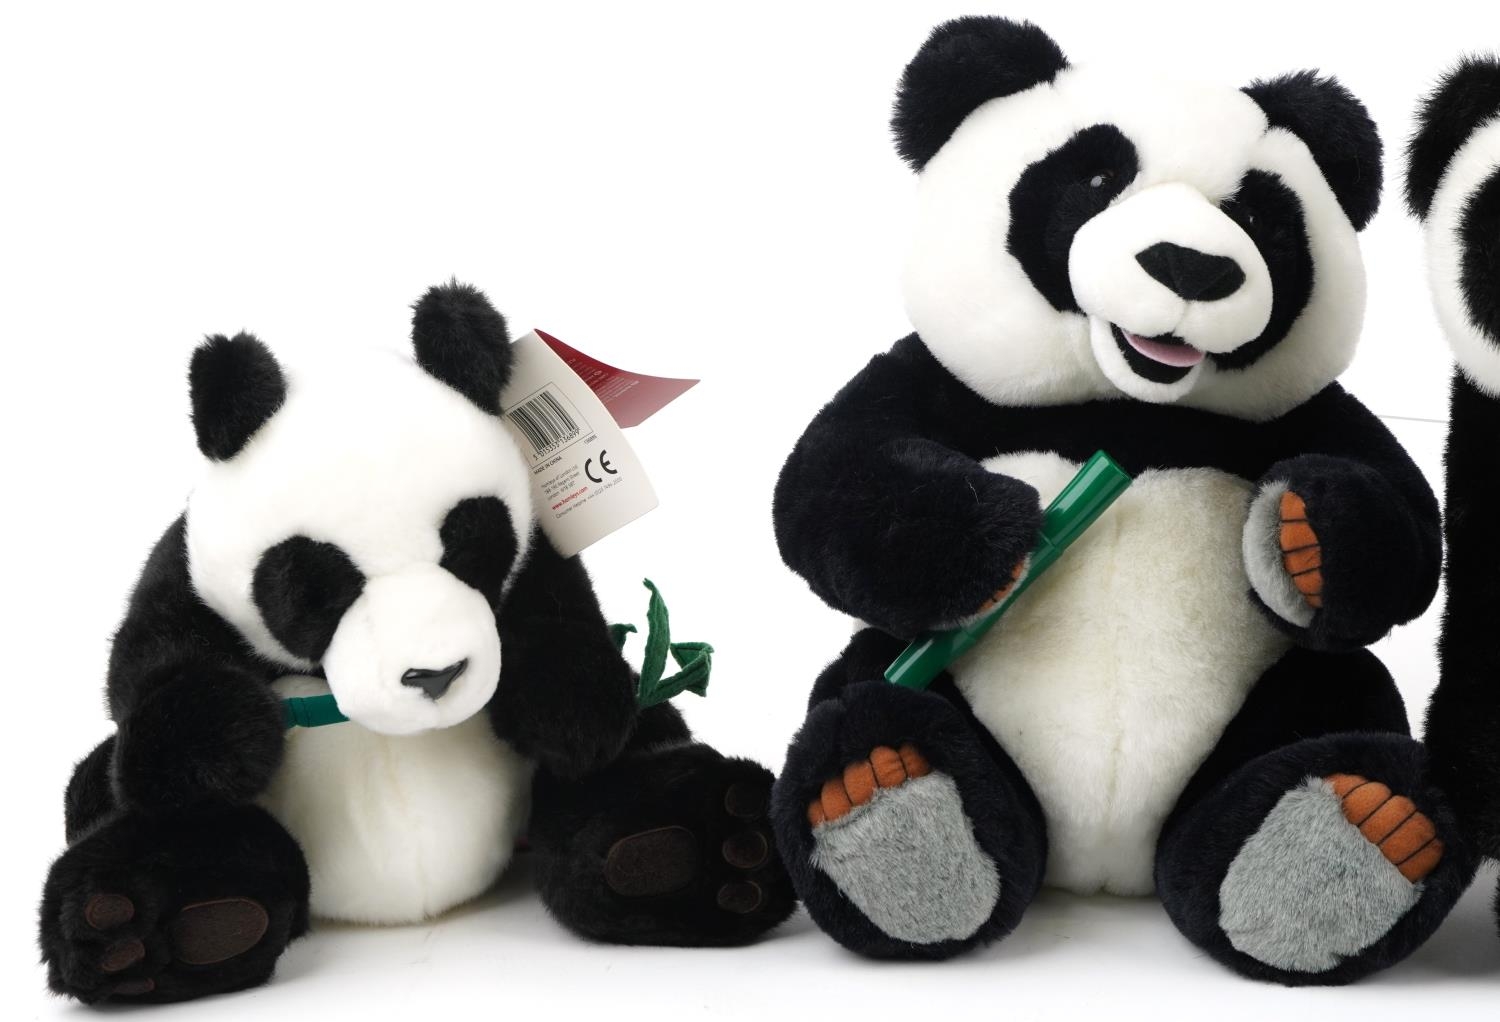 Hermann teddy bear with jointed limbs and three soft toy pandas, 42cm high - Image 2 of 8